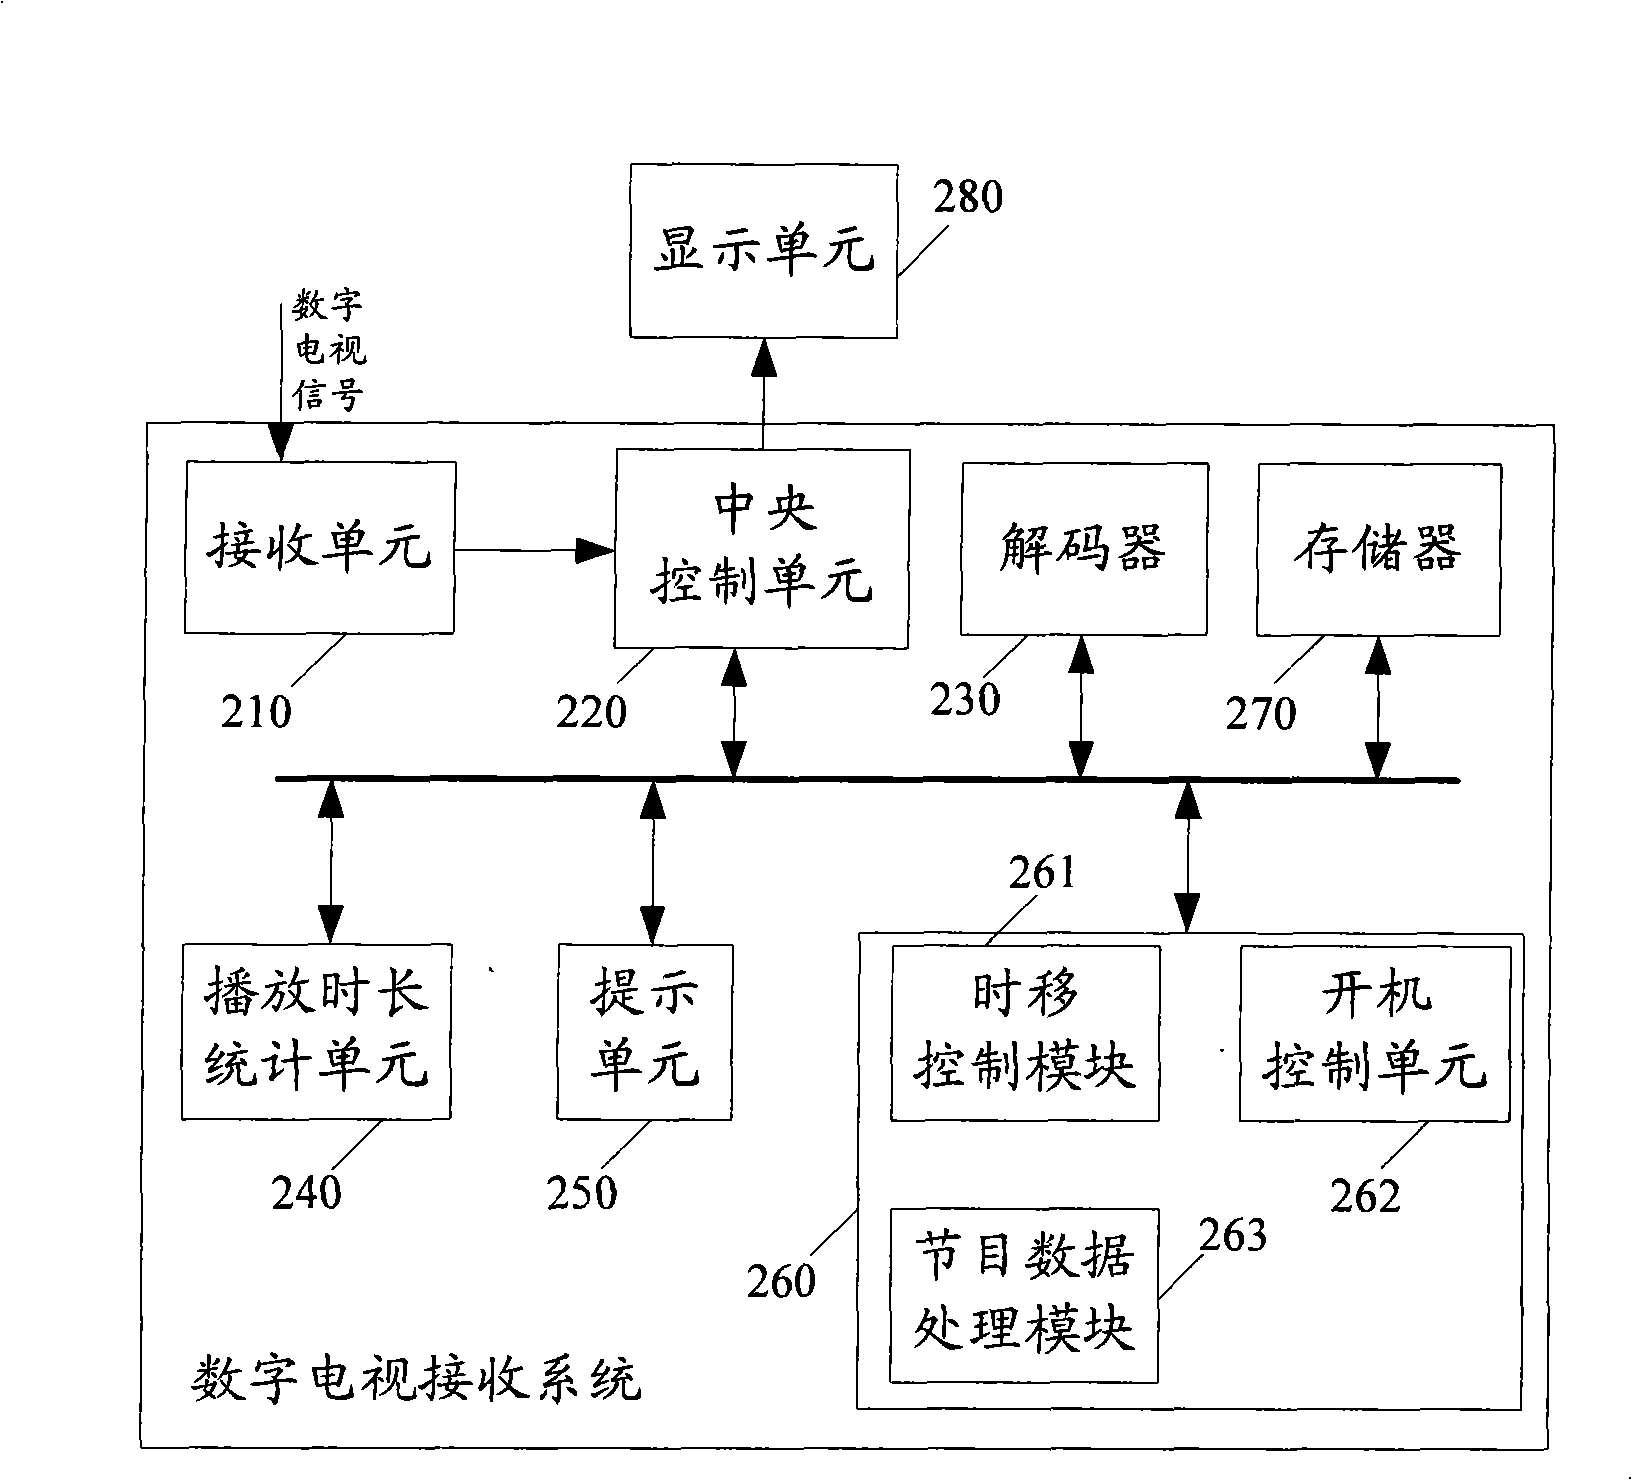 Digital TV receiving system, digital TV playing management method and system